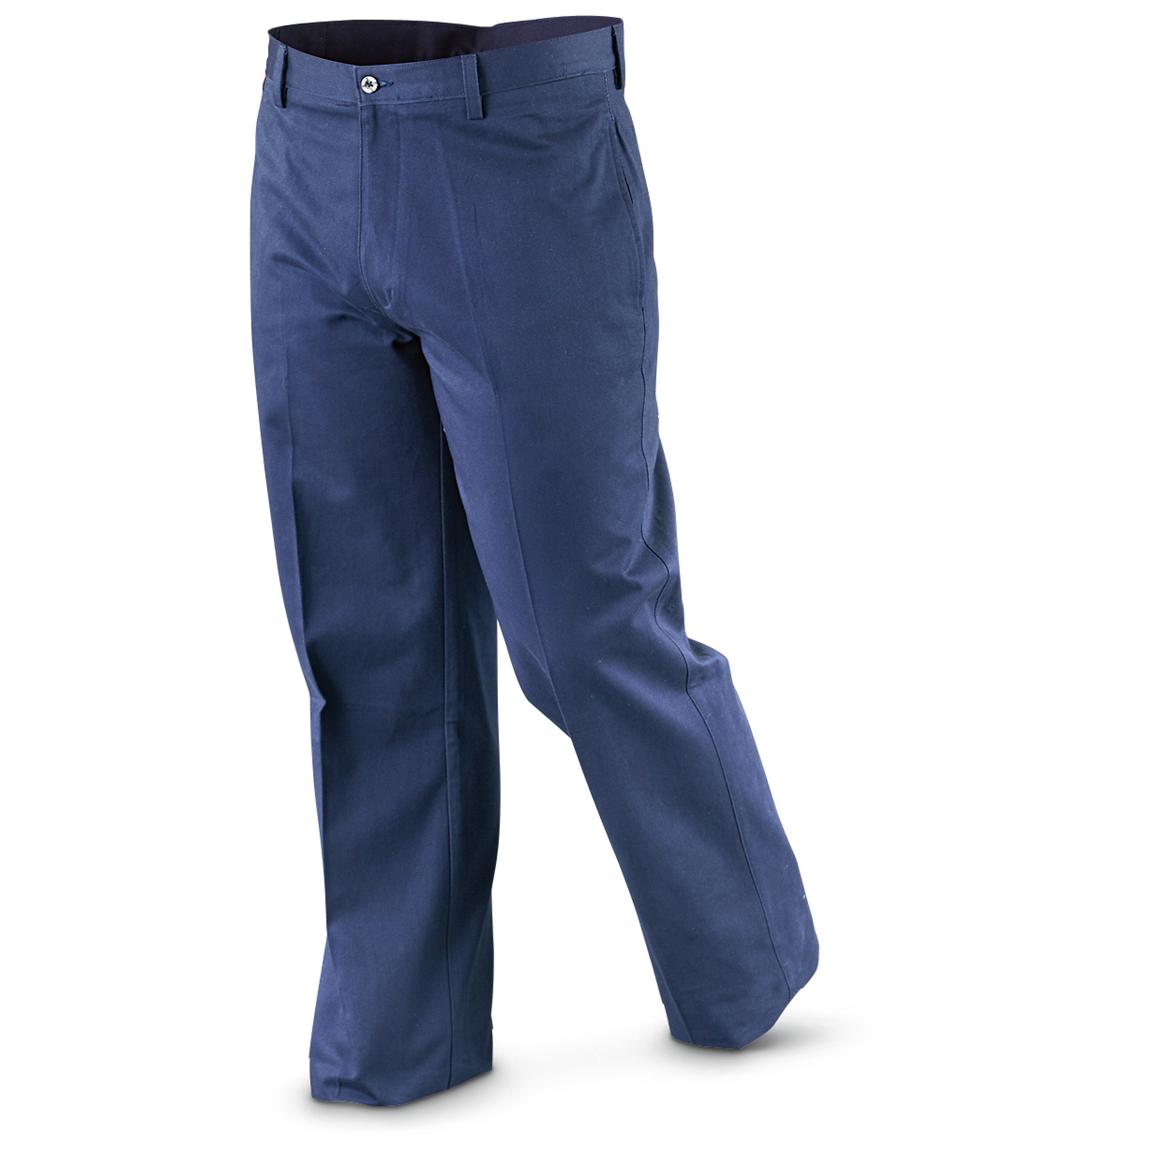 Red Wing® Cotton Work Pants - 281410, Jeans & Pants at Sportsman's Guide